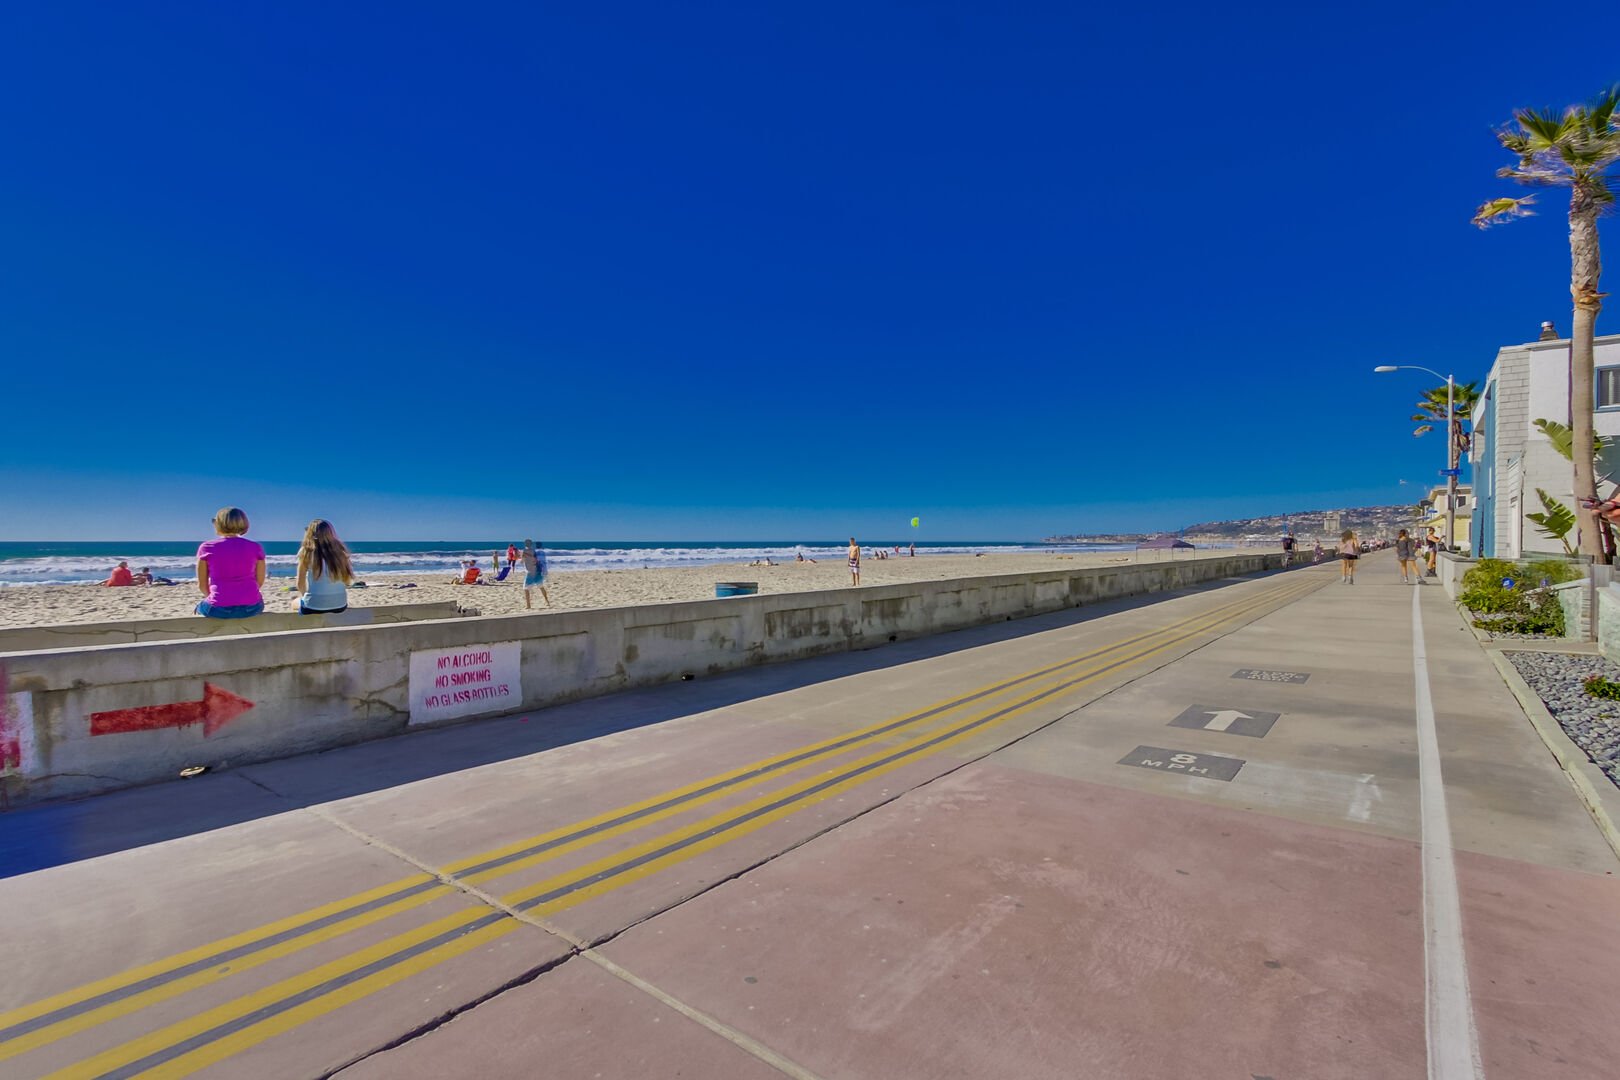 Stroll or bike along the 6 mile oceanfront loop on the Pacific Beach/ Mission Beach boardwalk